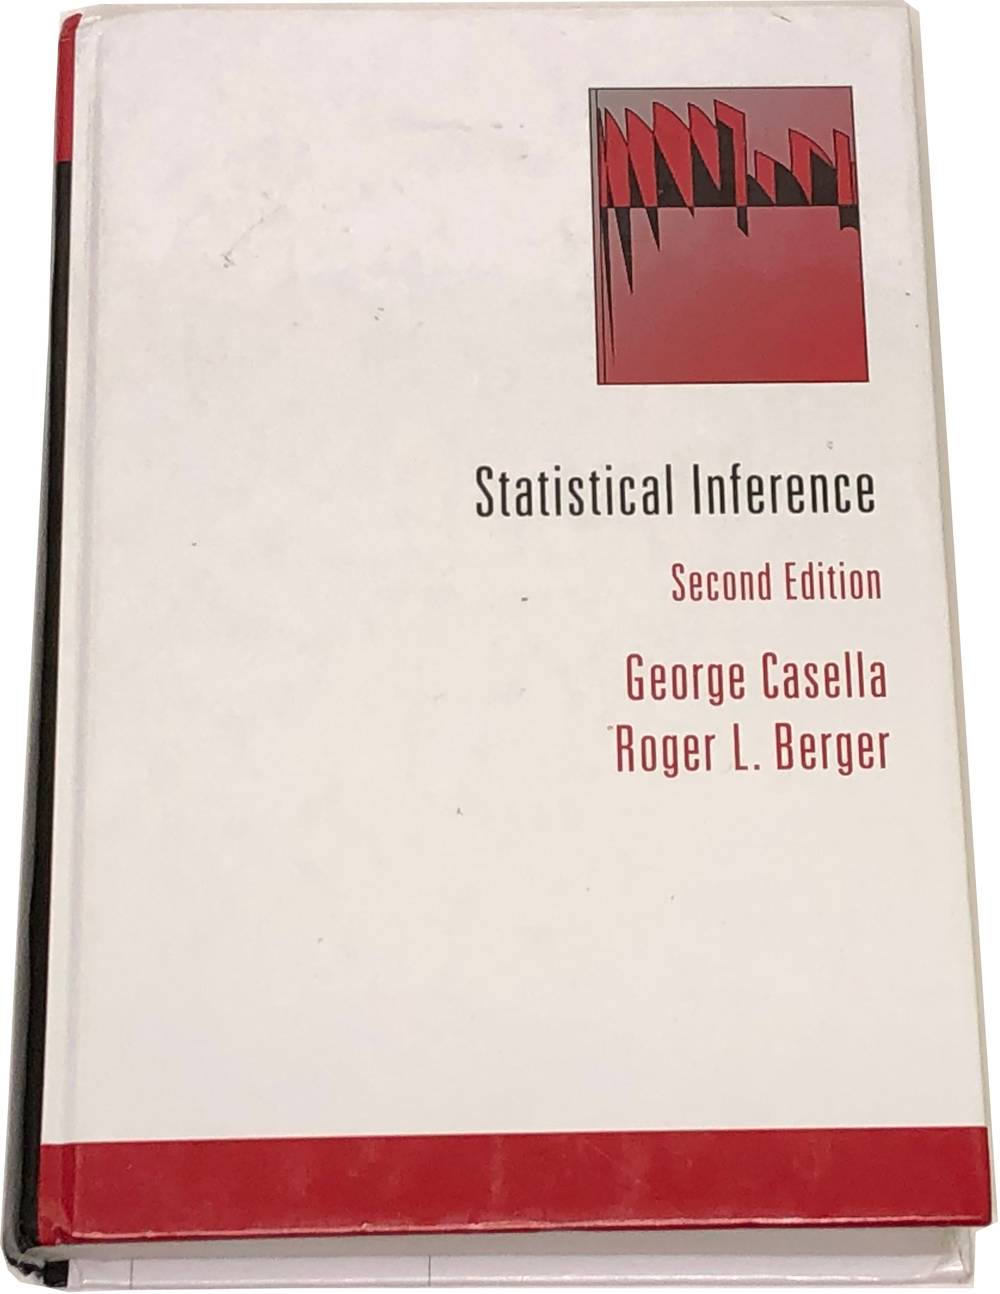 Book image of Statistical Inference.